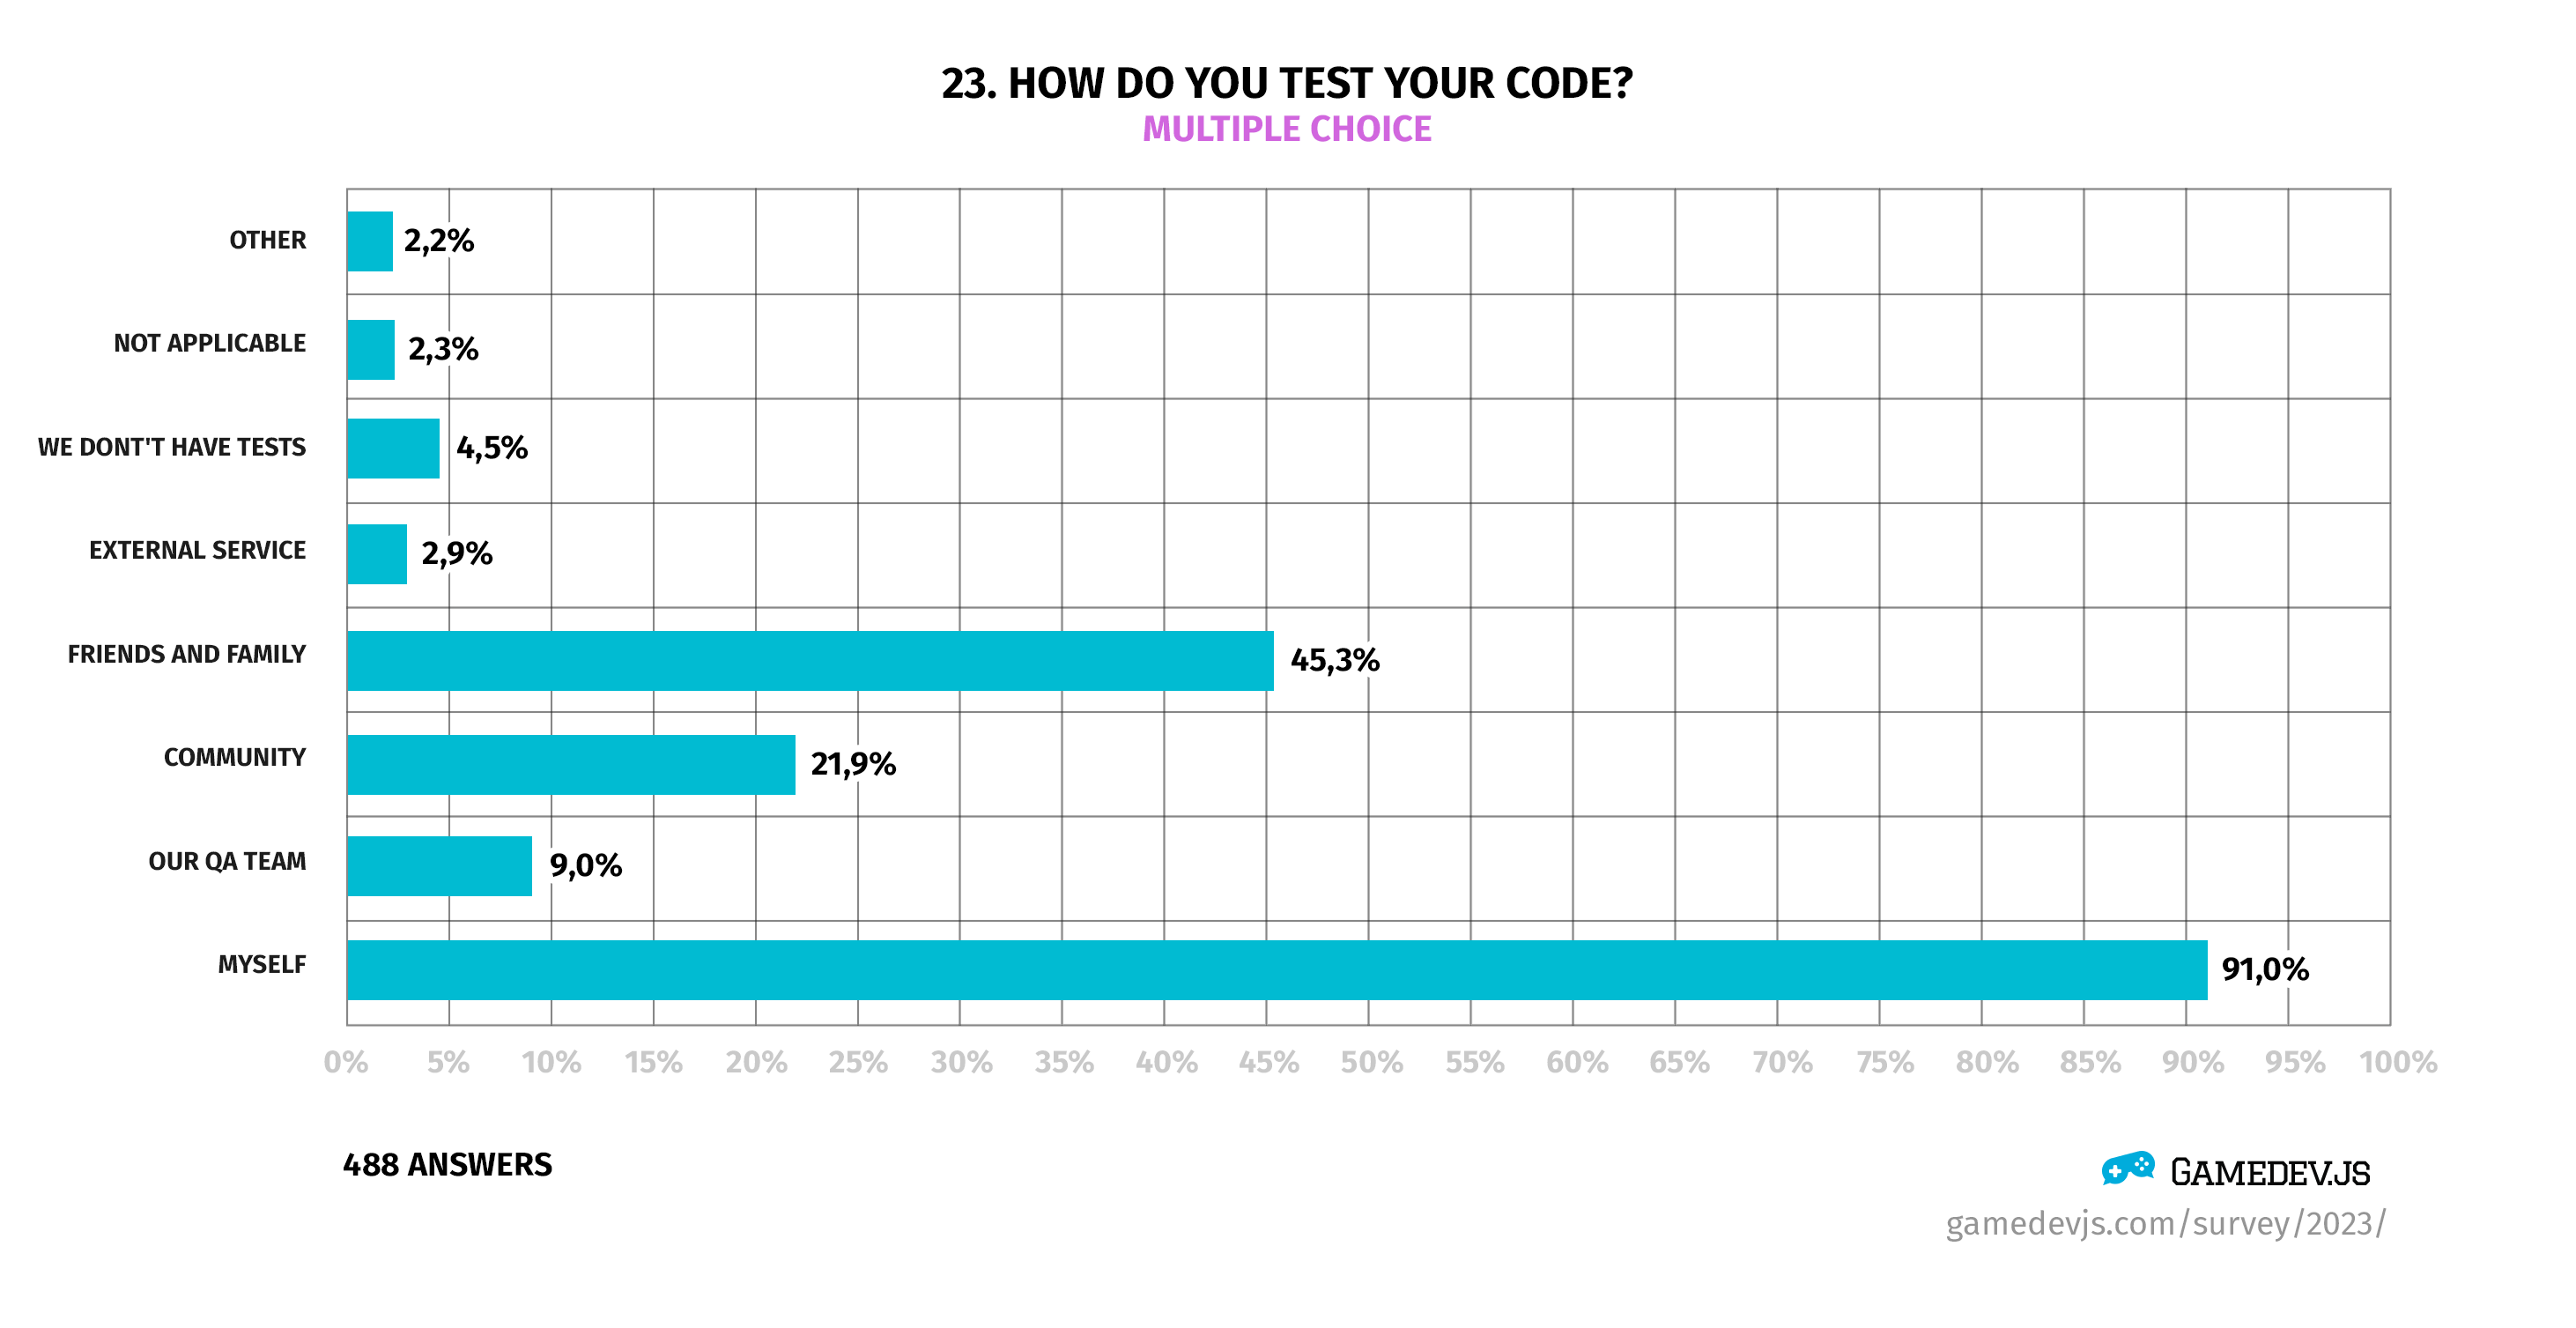 Gamedev.js Survey 2023 - Question #23: How do you test your code?